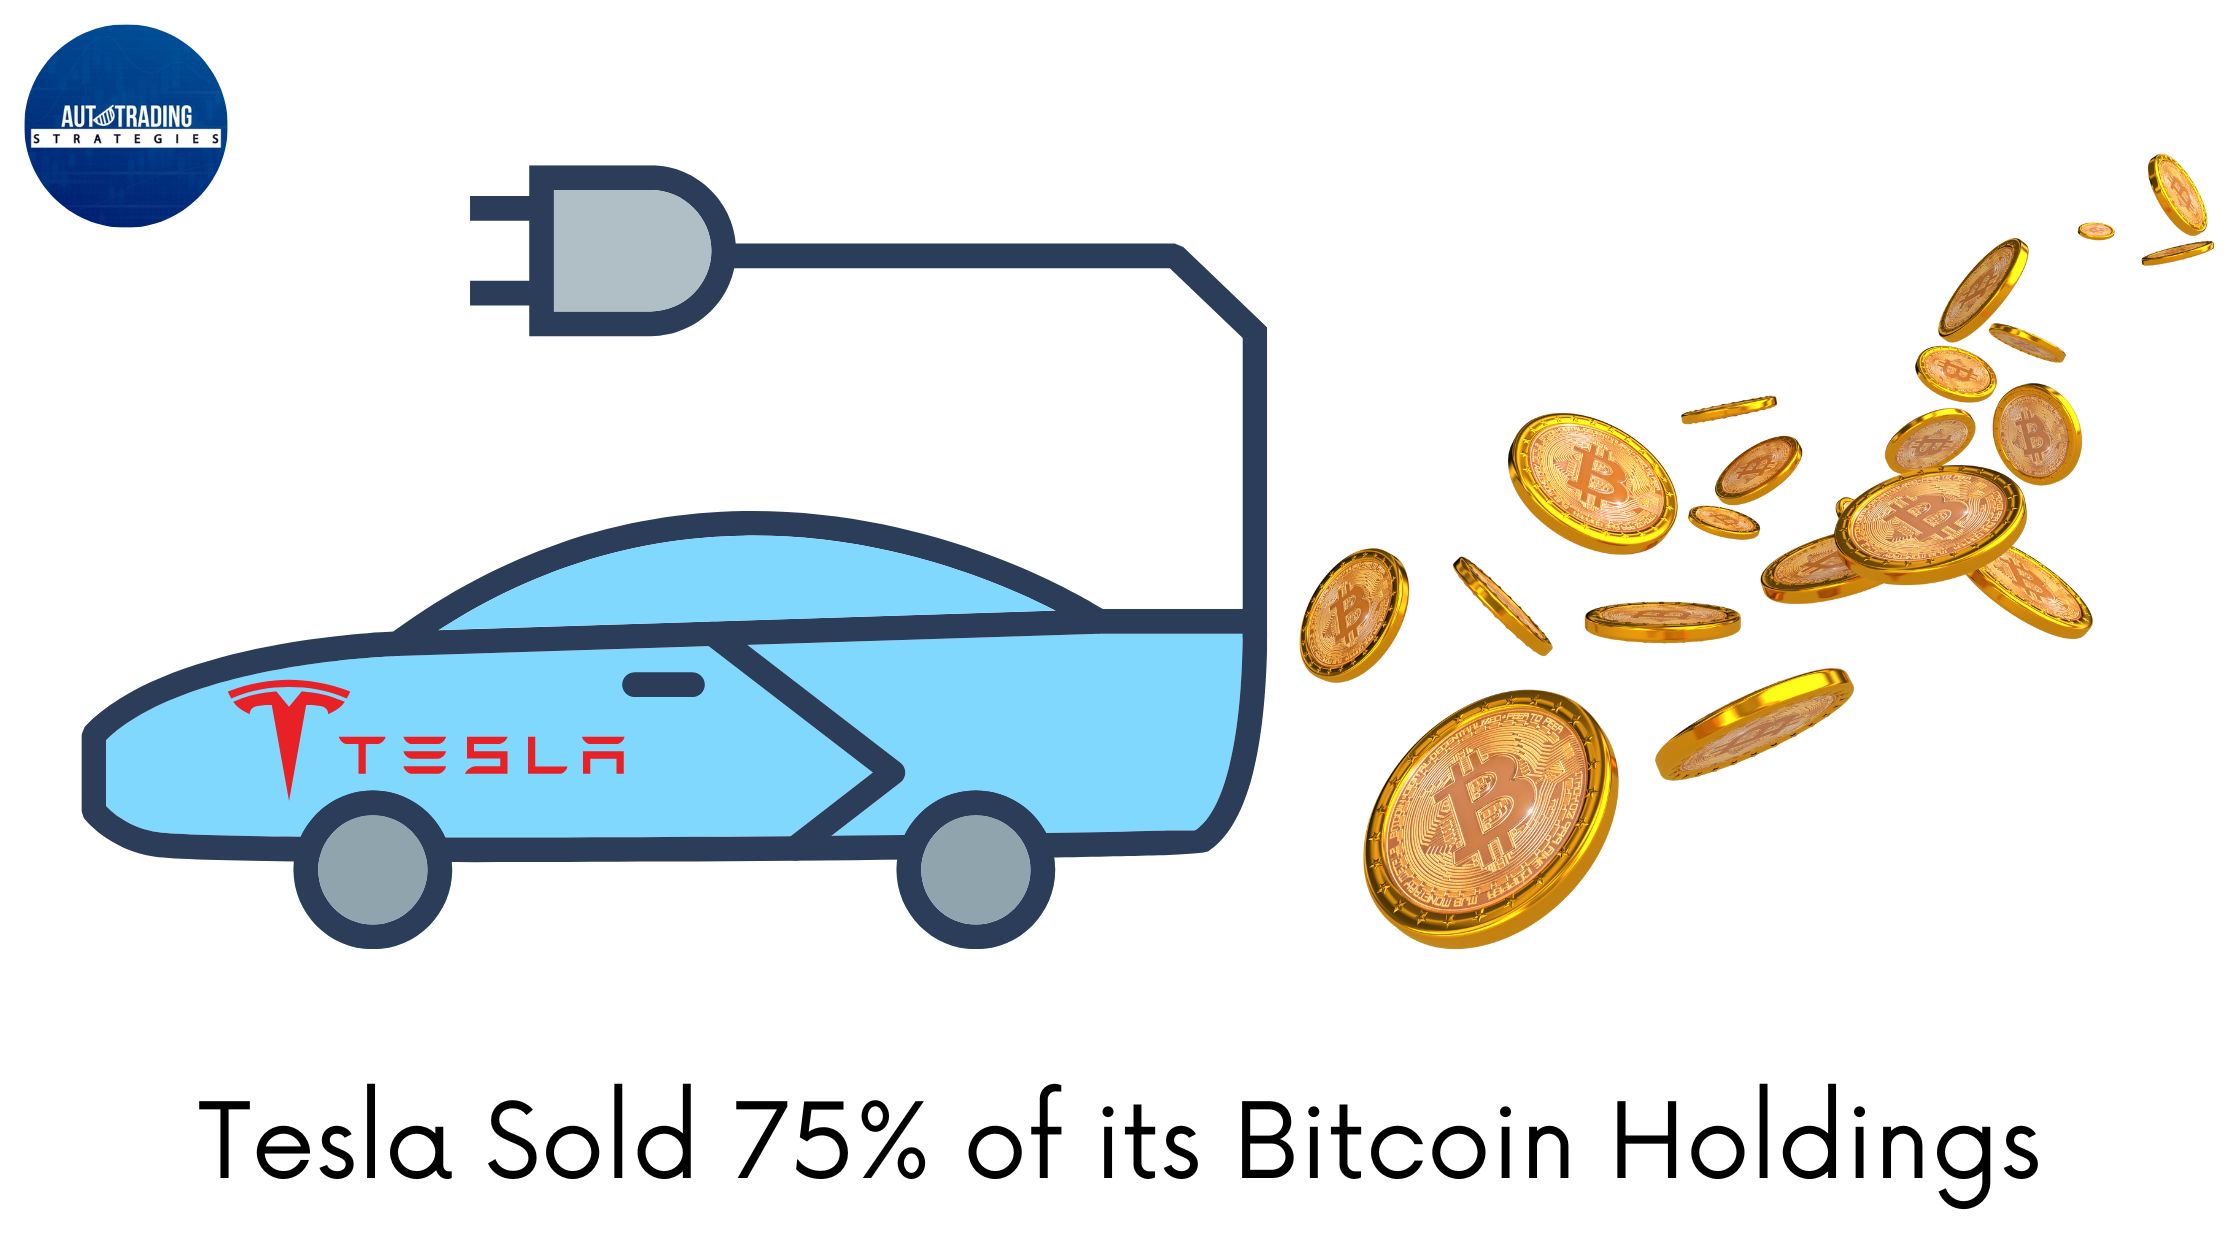 Tesla Sold 75% of its Bitcoin Holdings